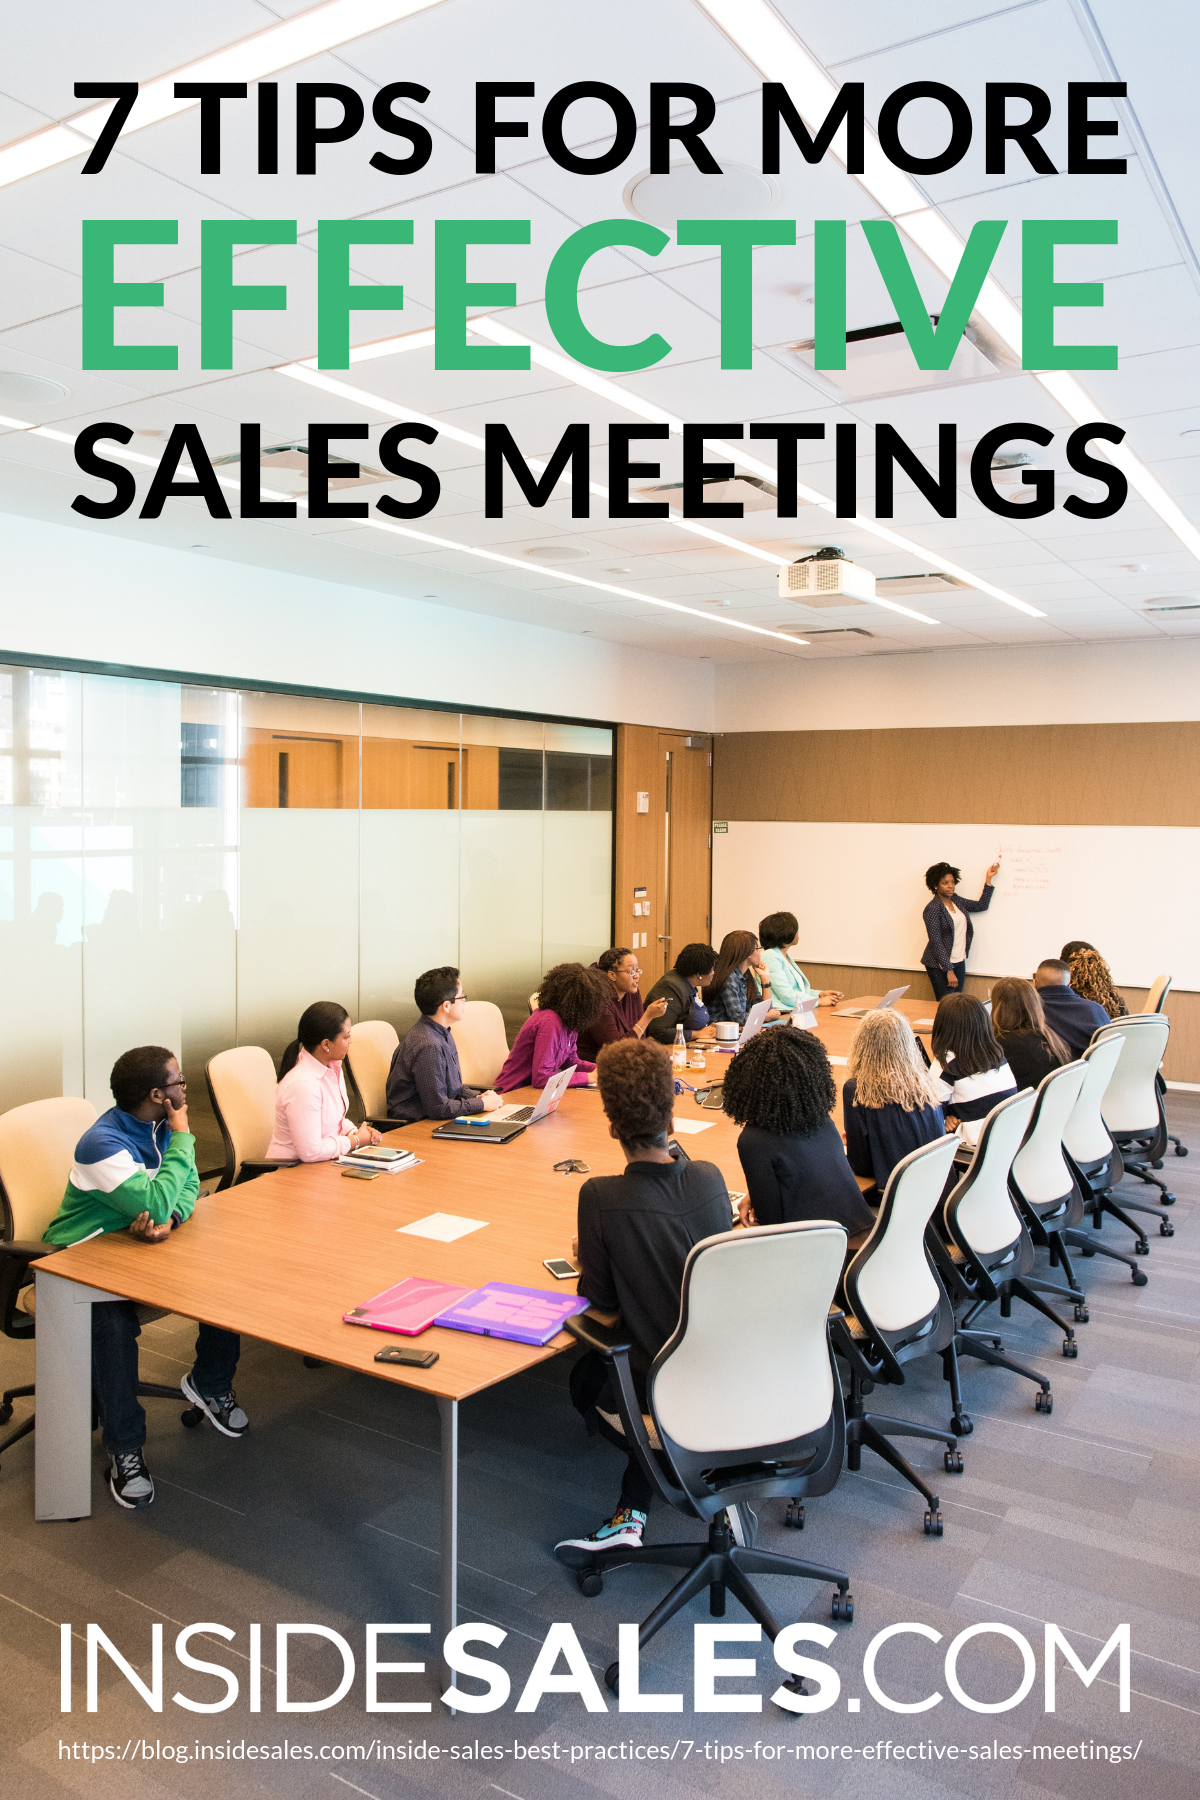 7 Tips For More Effective Sales Meetings [INFOGRAPHIC] https://resources.insidesales.com/blog/inside-sales-best-practices/7-tips-for-more-effective-sales-meetings/